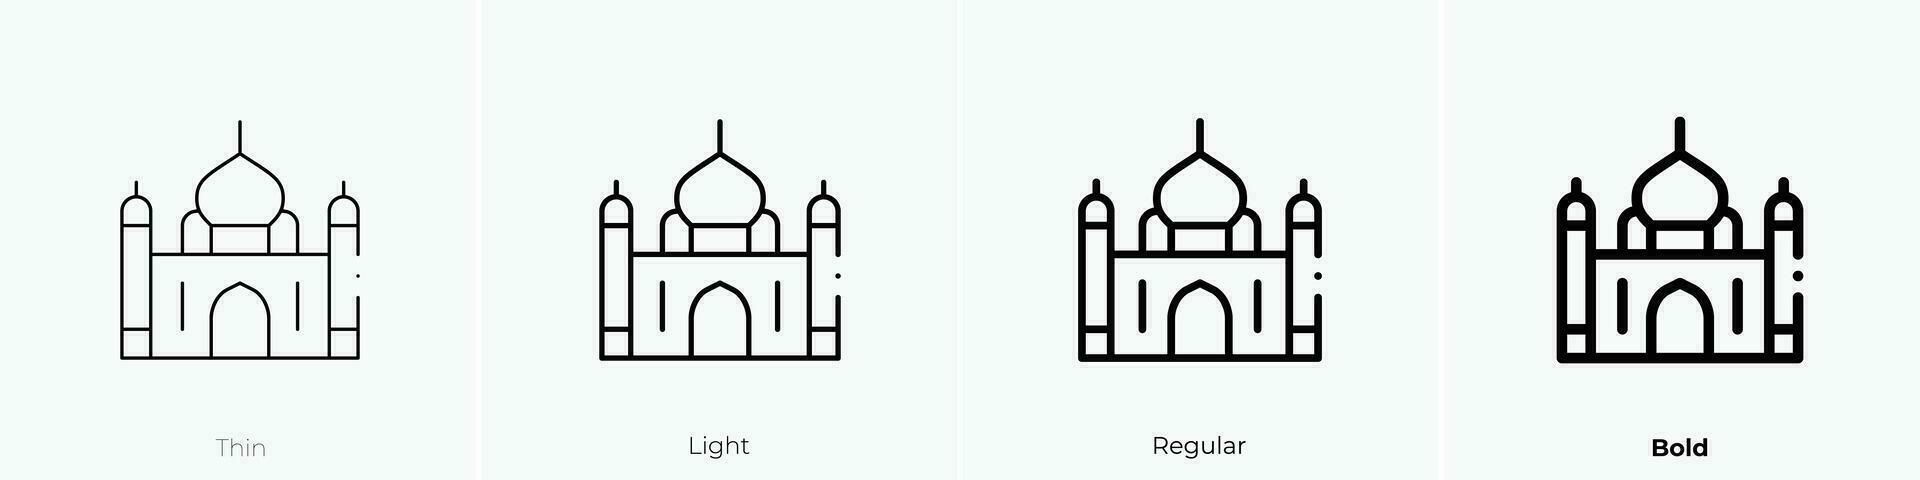 taj mahal icon. Thin, Light, Regular And Bold style design isolated on white background vector